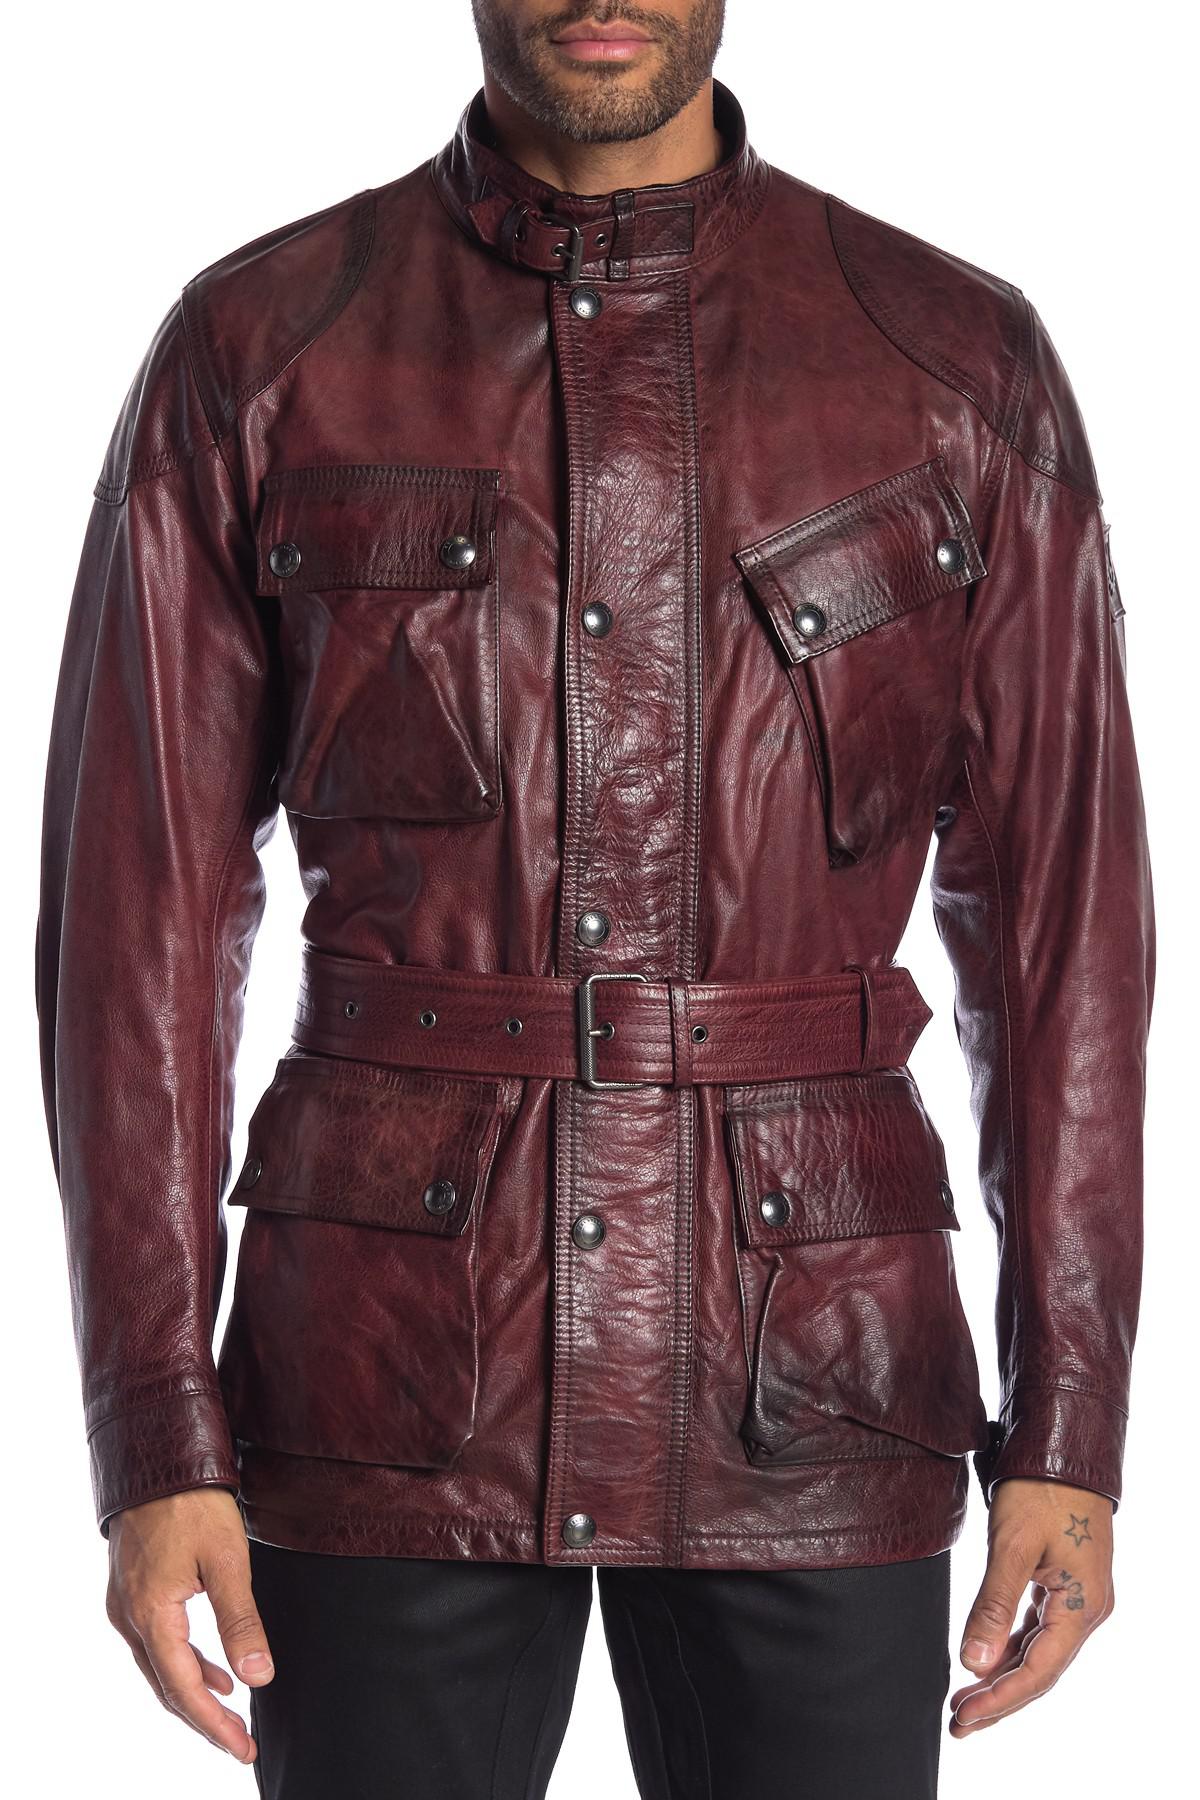 Belstaff Panther Leather Jacket in Oxblood Red (Red) for Men - Lyst